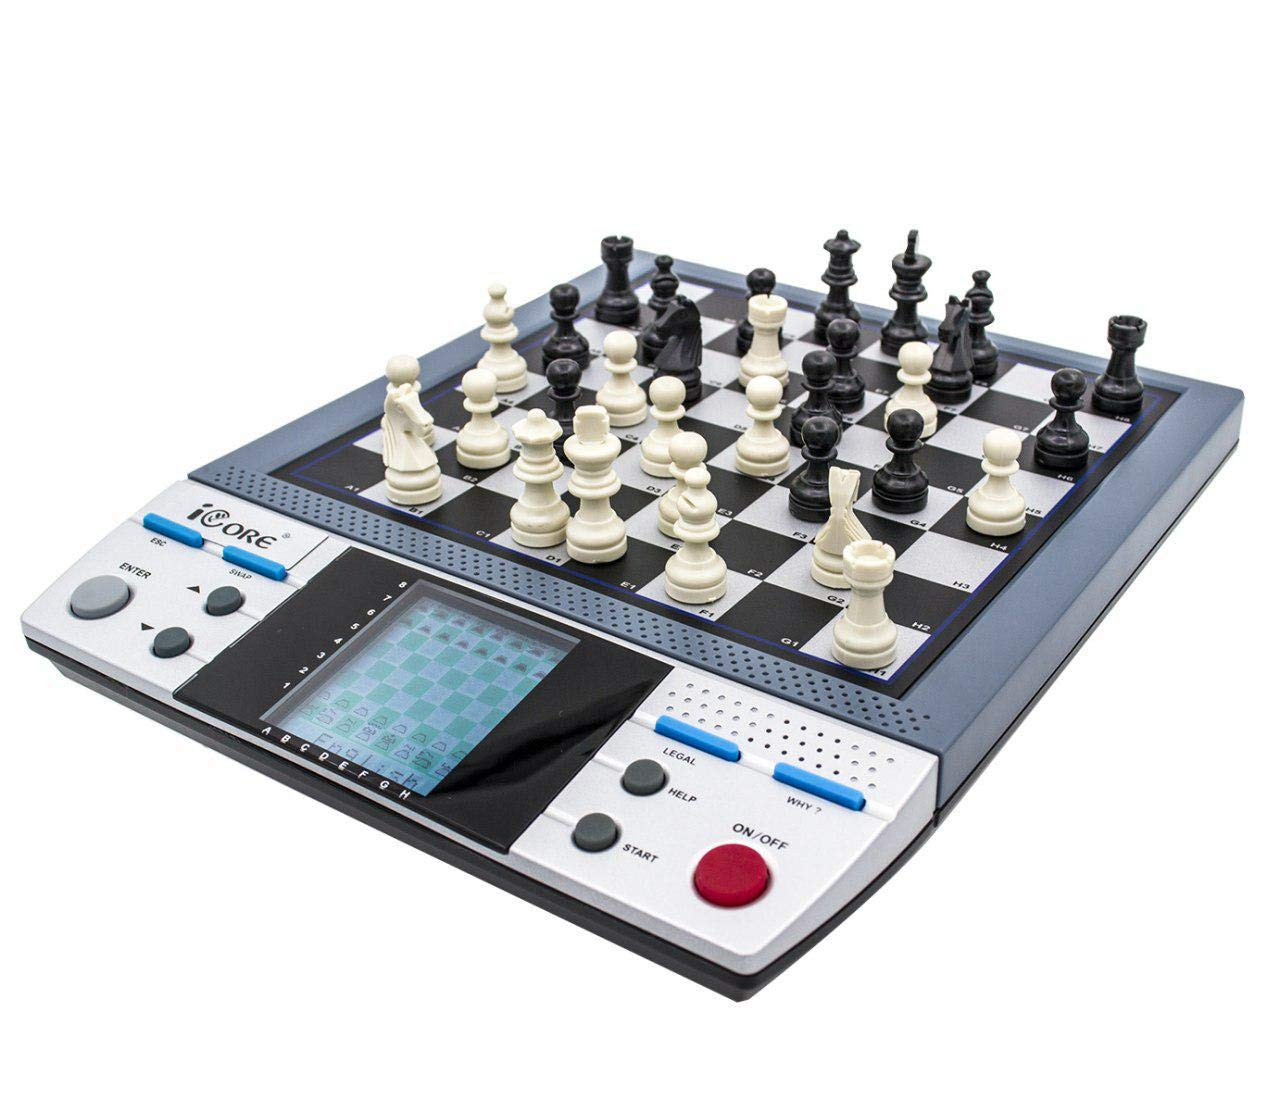 iCore Electronic Chess Set, Talking Chess Board Games for Kids